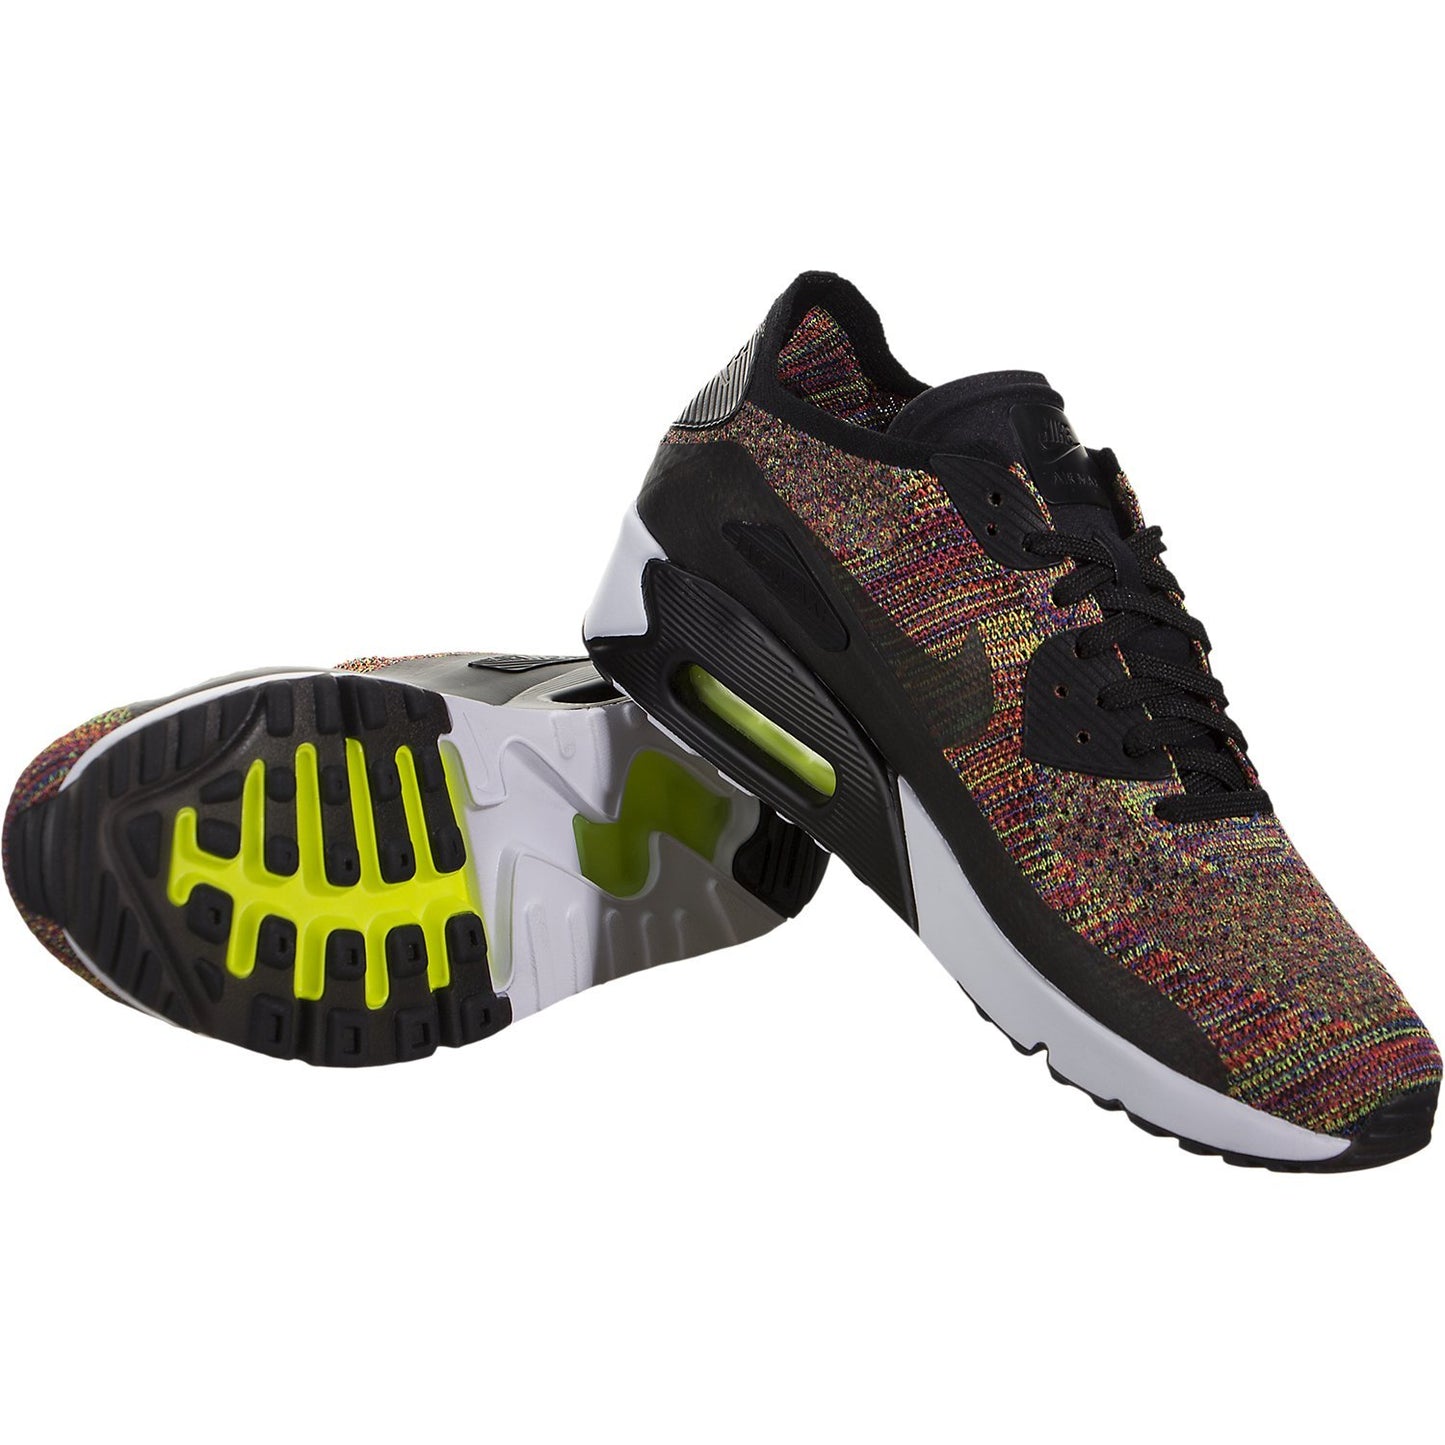 Nike Air Max 90 Ultra 2.0 Flyknit Multi-Color 875943-002